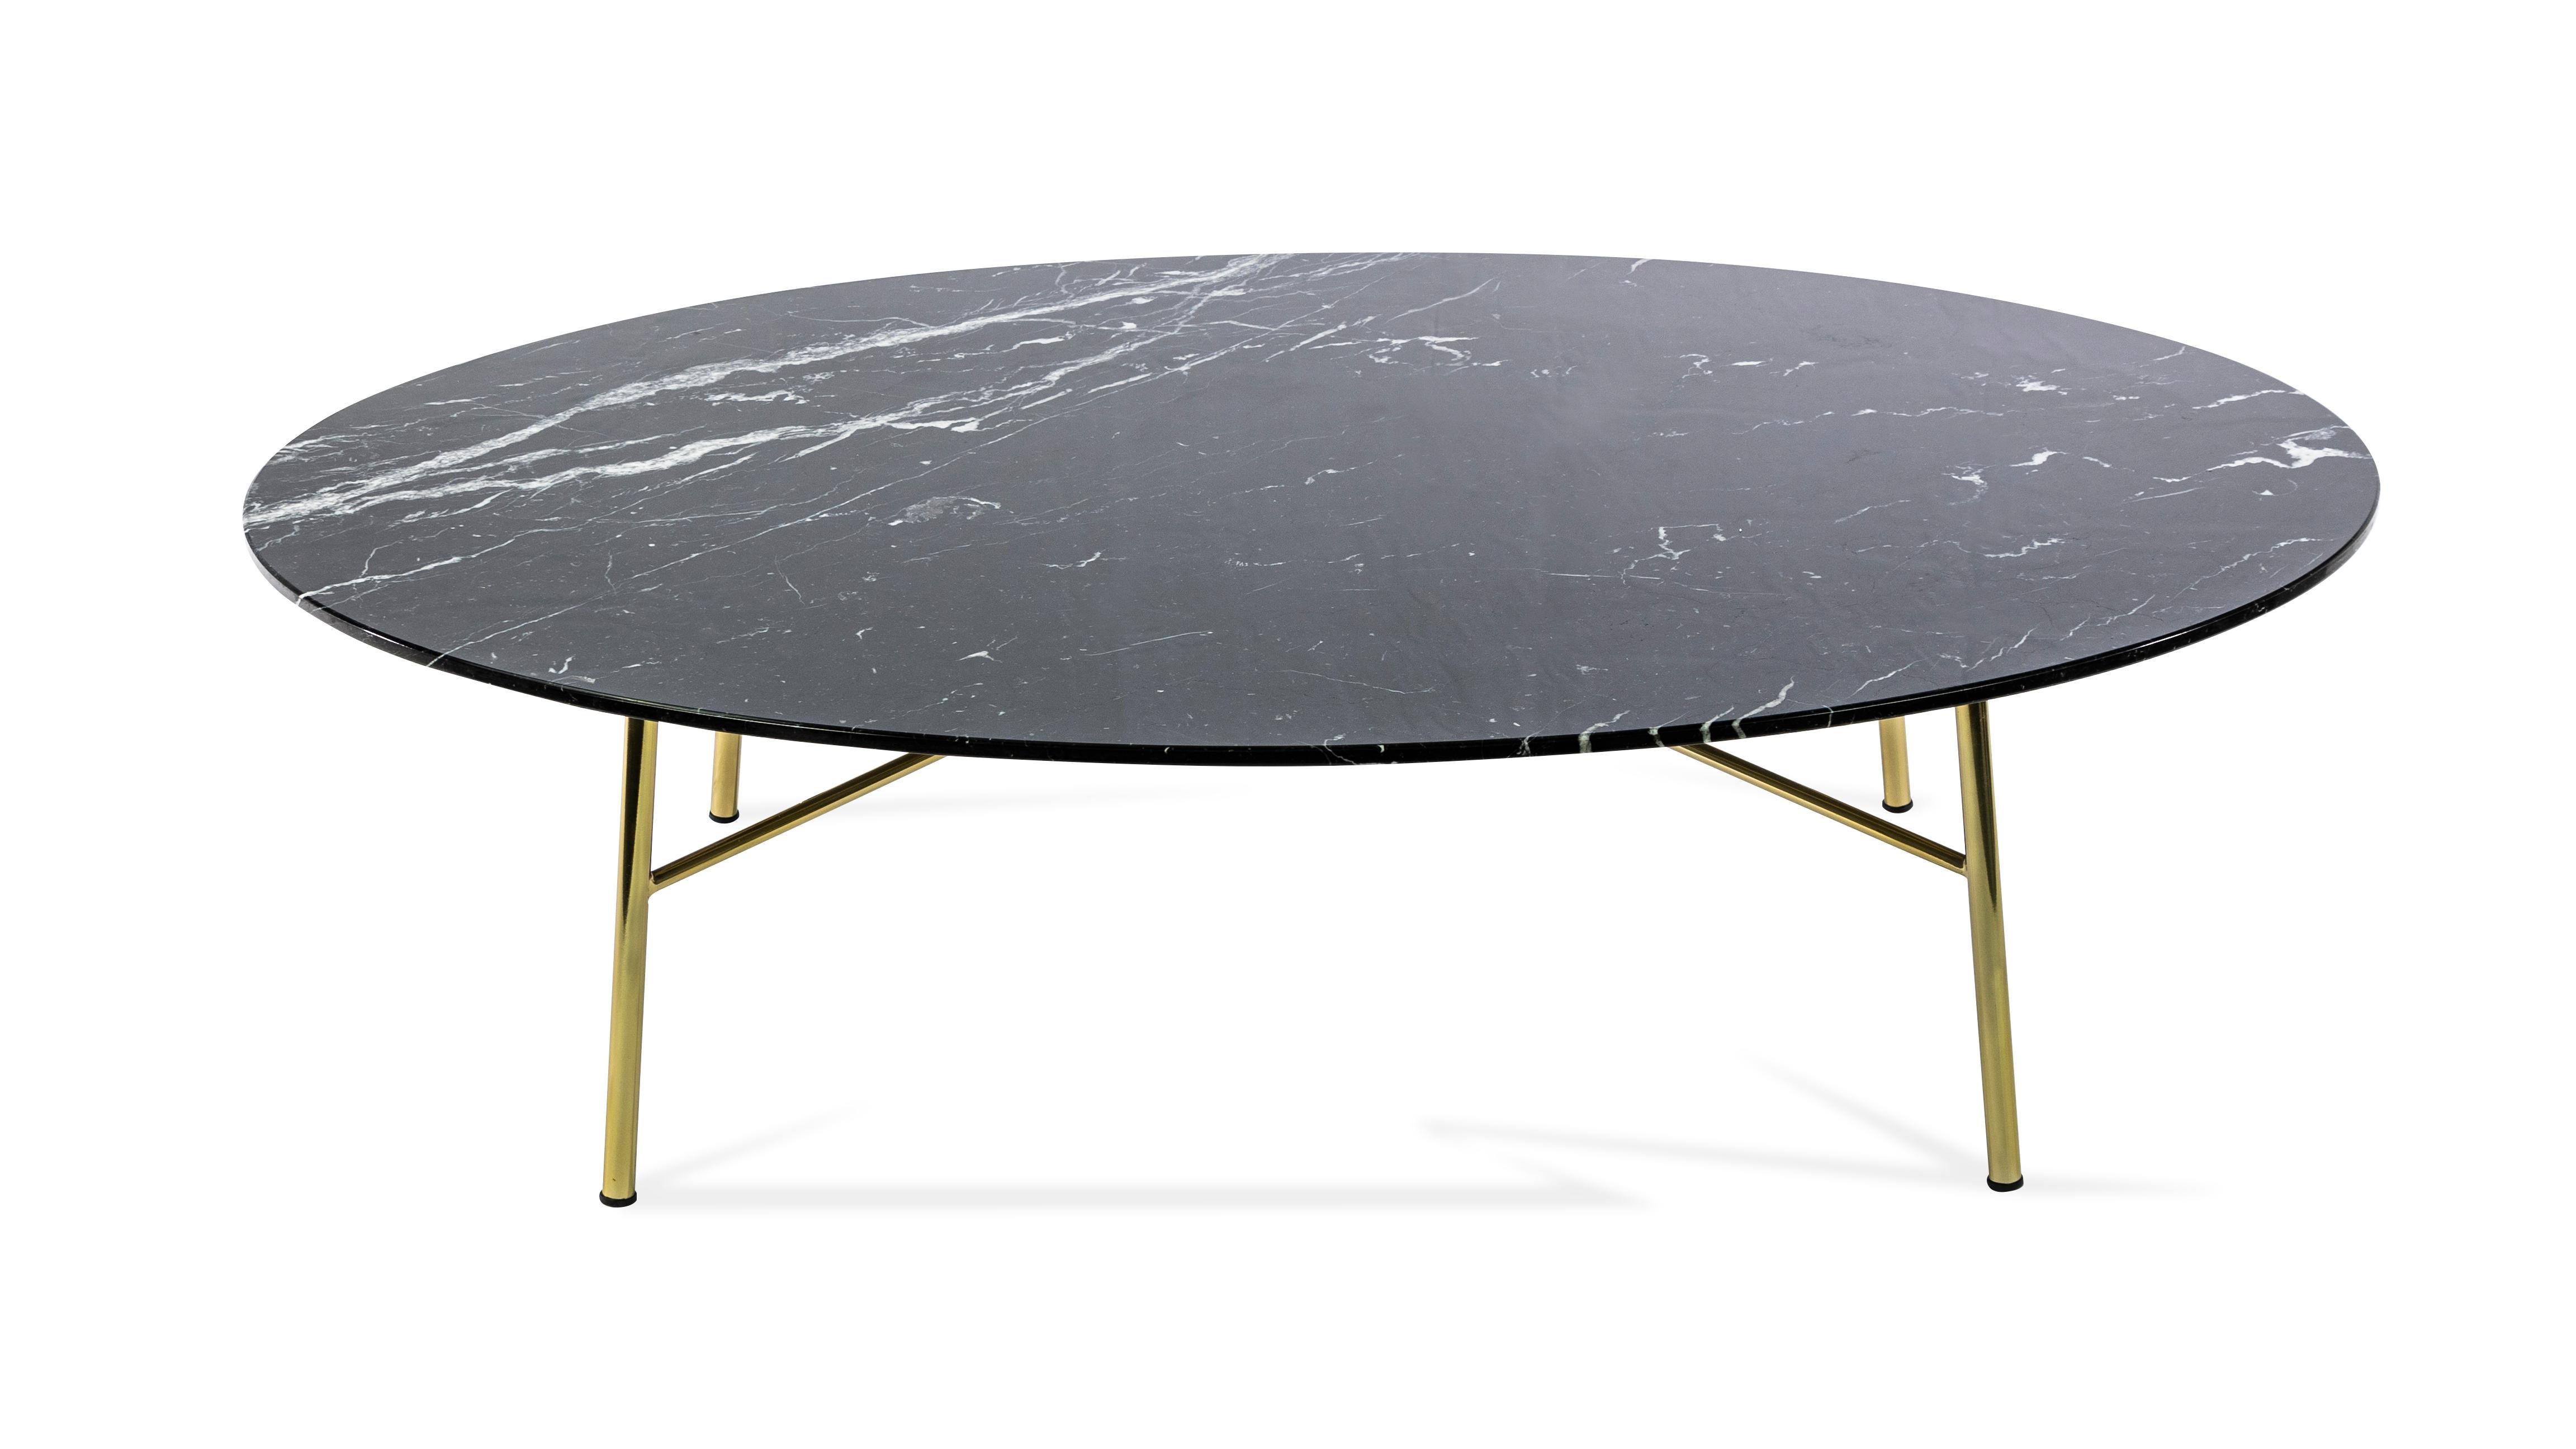 Coffee table, with metal frame, painted in standard or special colors, top available in glass ceramic color black Marquinia marble oval 110 x 76 cm.
It fits perfectly in a hotel lounge or home environment.